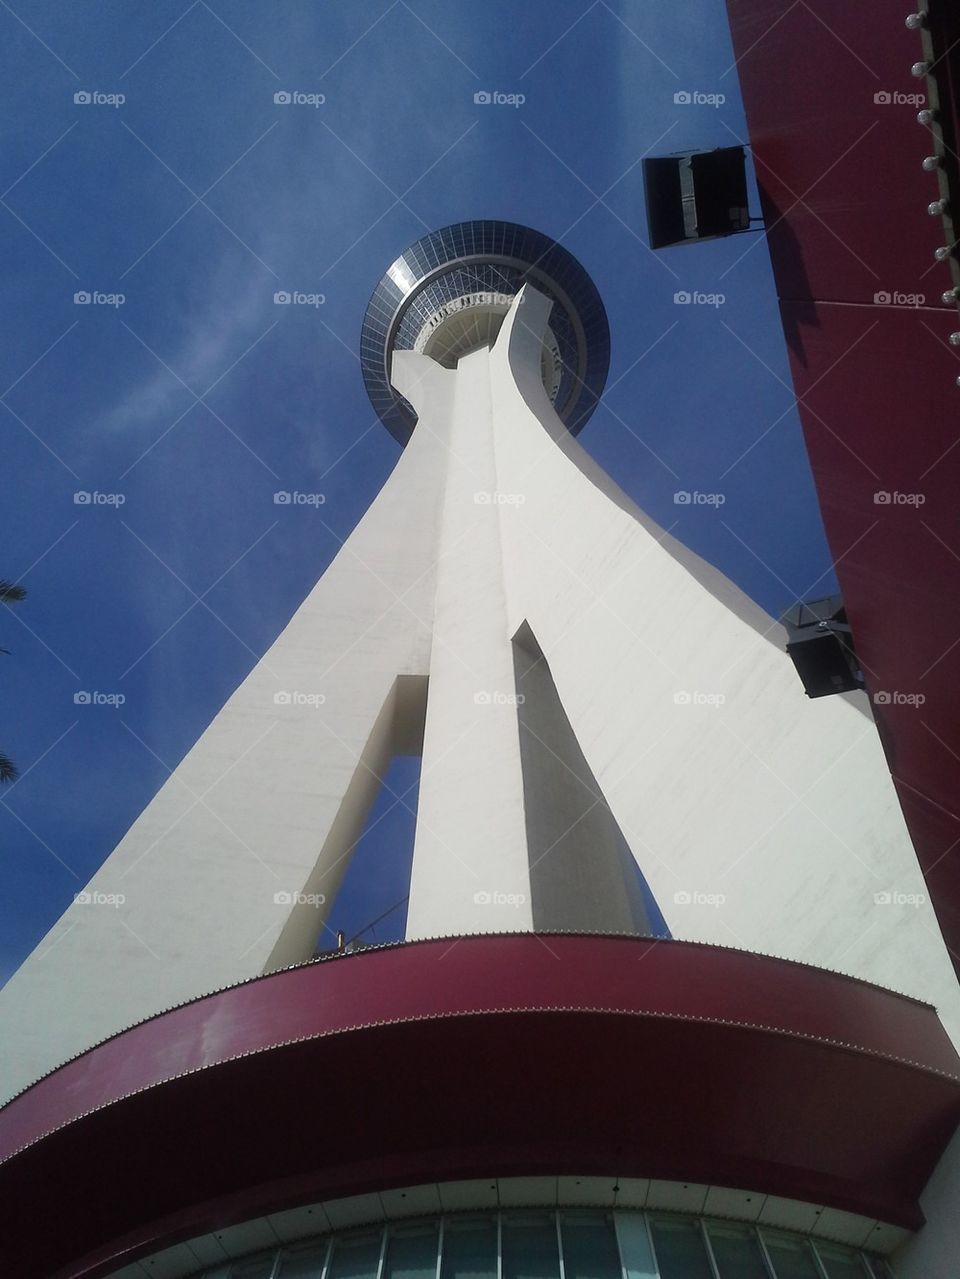 stratosphere tower in Vegas